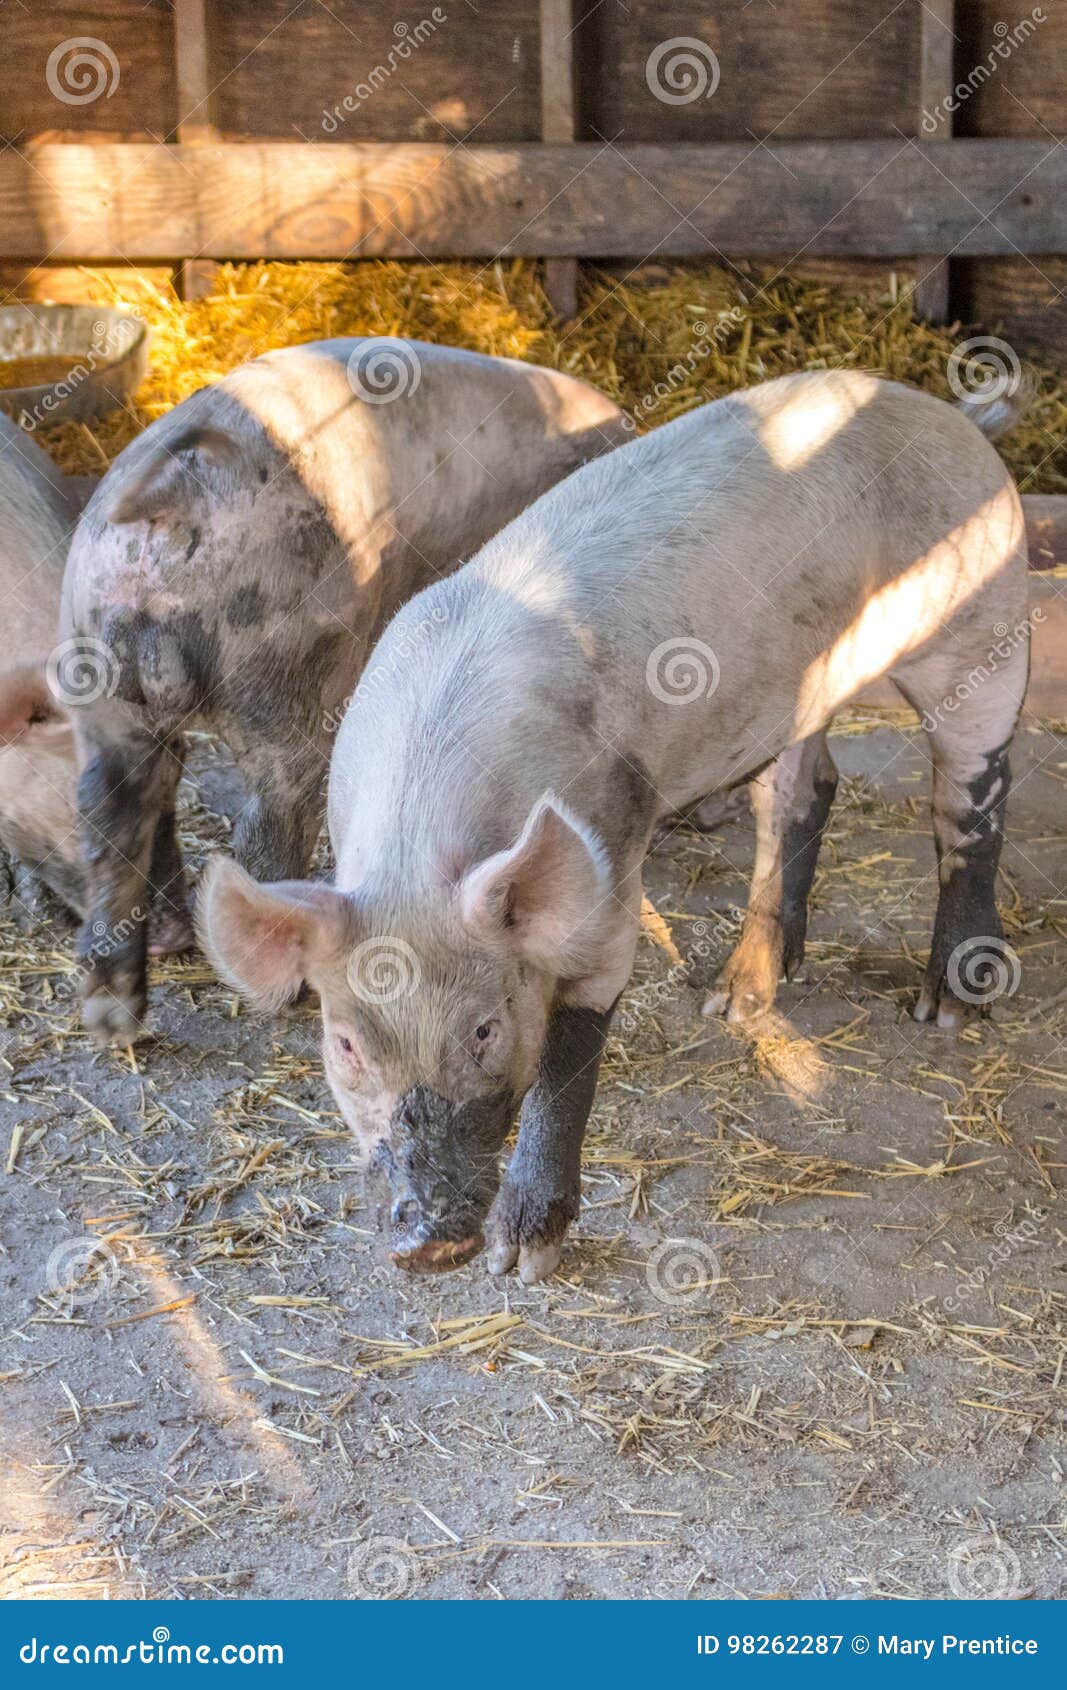 young dirty pink domestic pig with muddy snout, big ears and dirty hoofs, vertical format